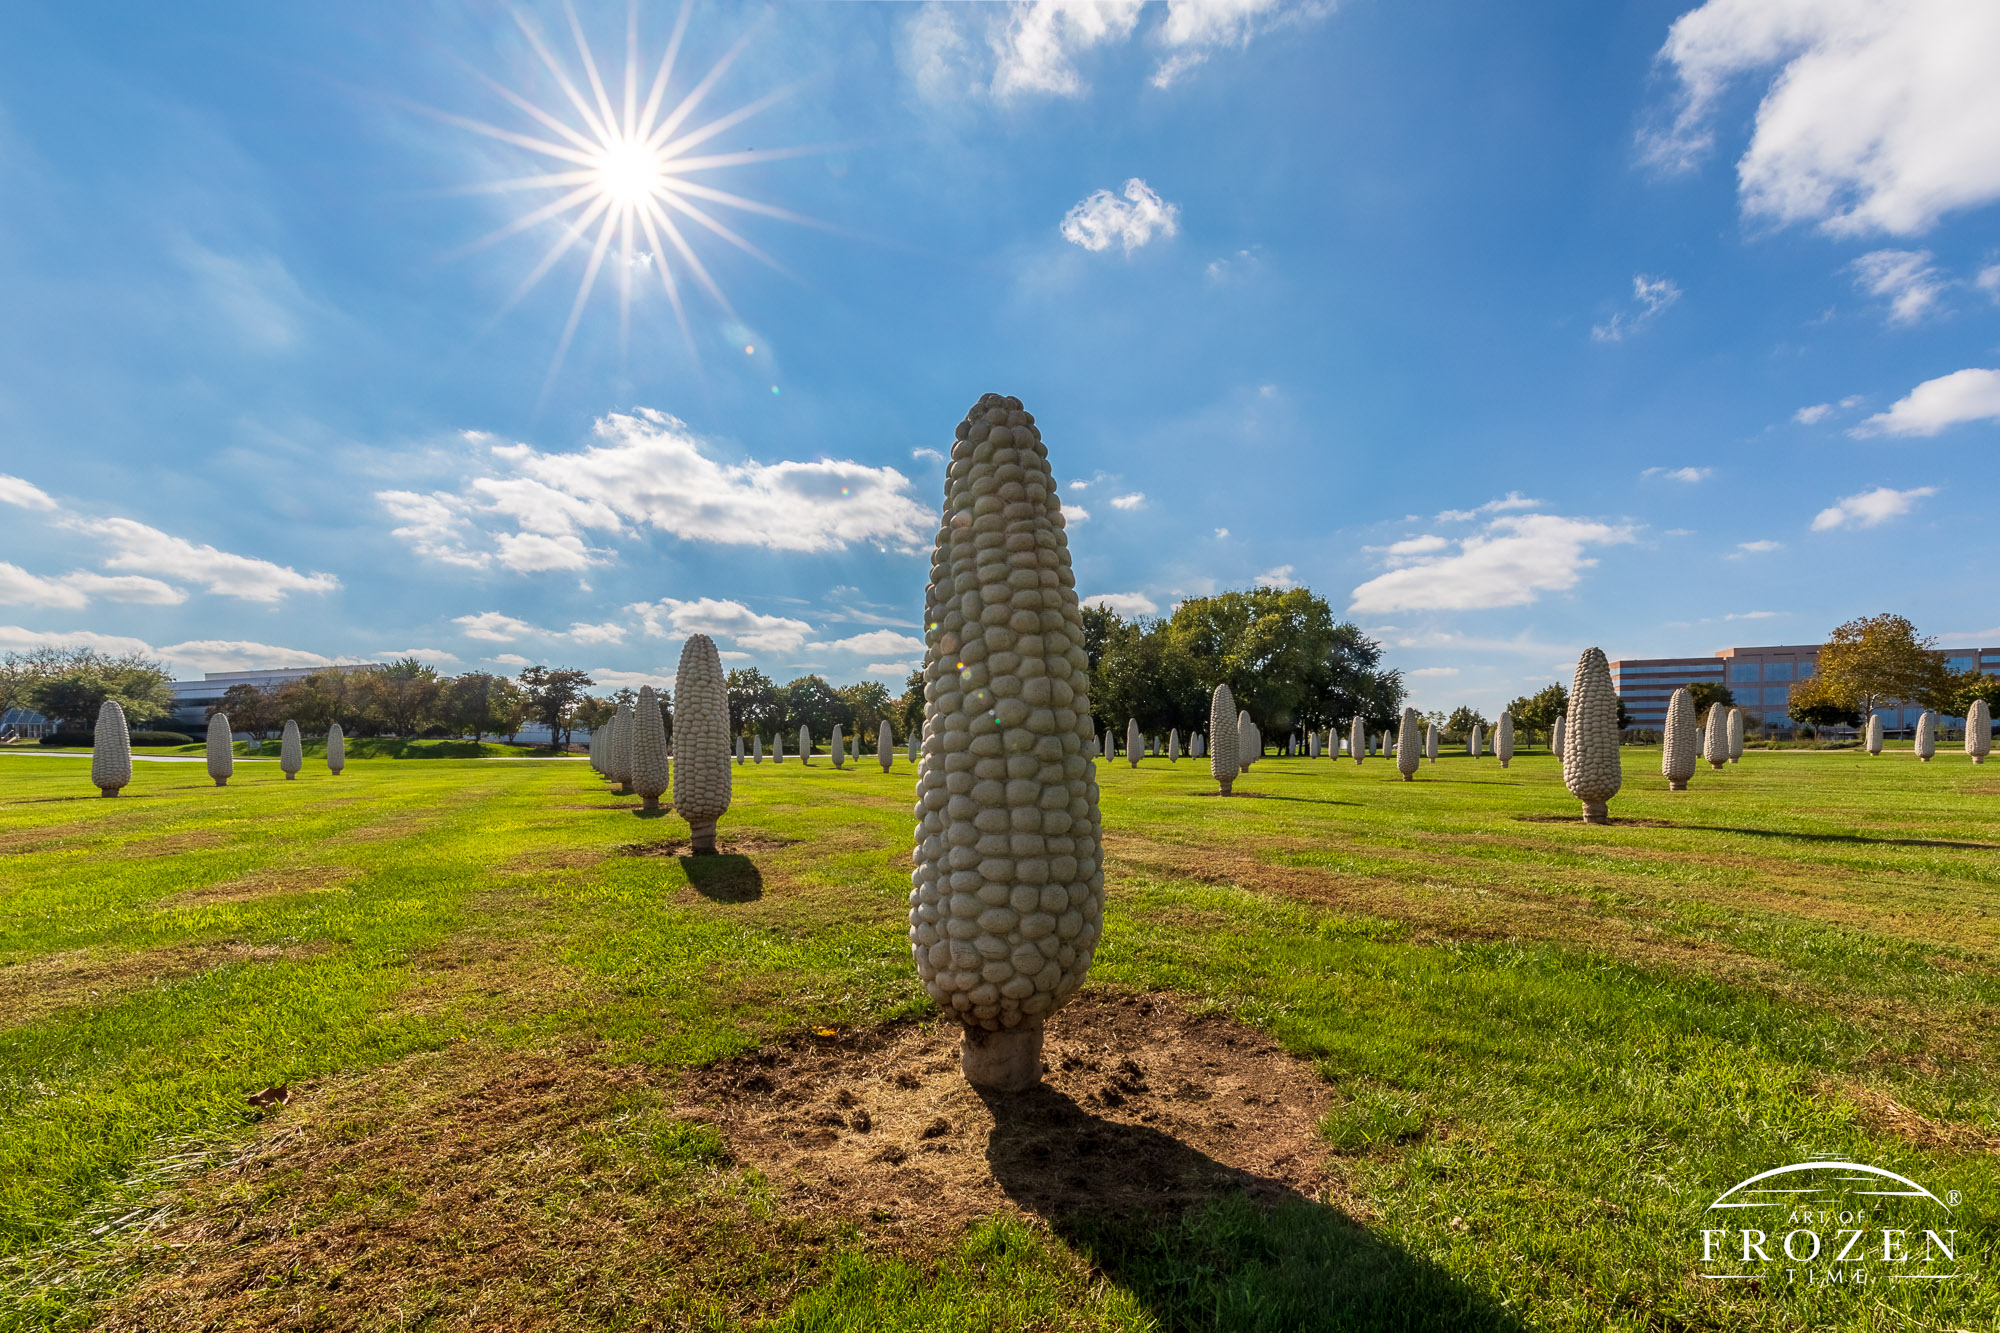 A field of six-foot tall concrete ears of corn which extends for many acres in Dublin Ohio